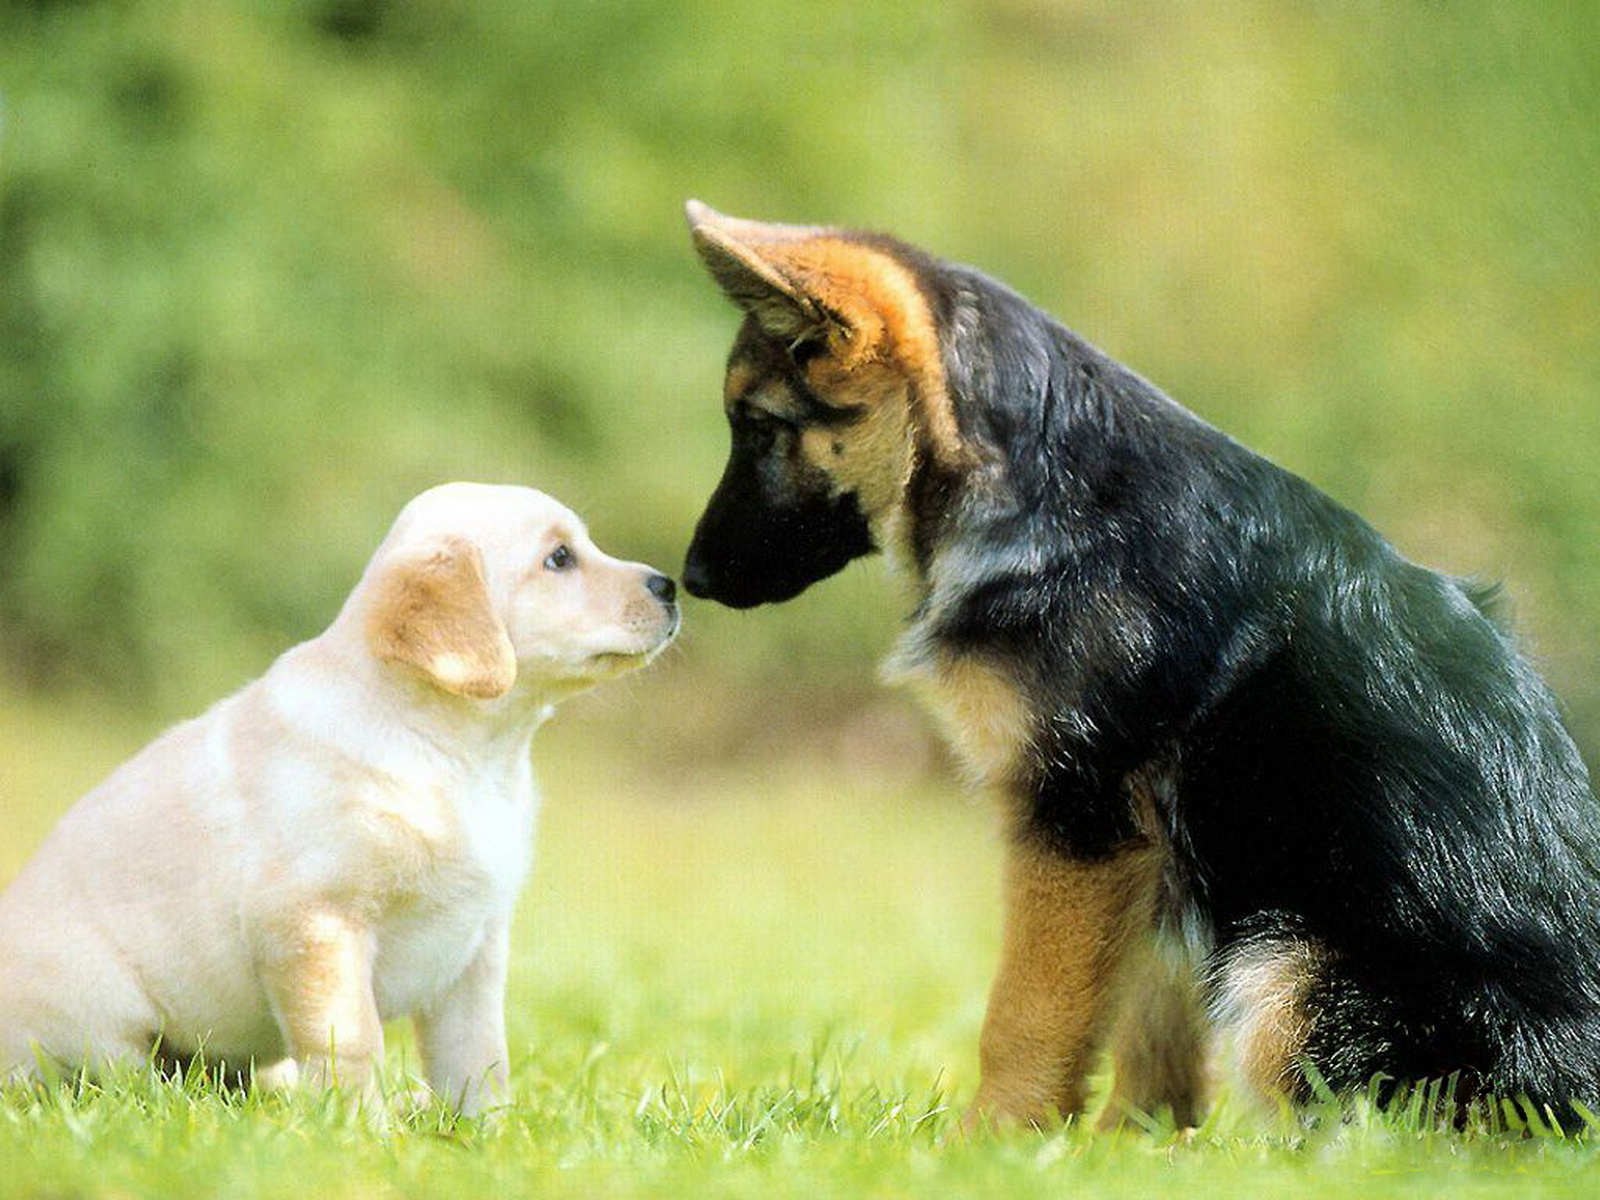  cute dogs care and affection amongst dogs love contrast cute dogs dogs